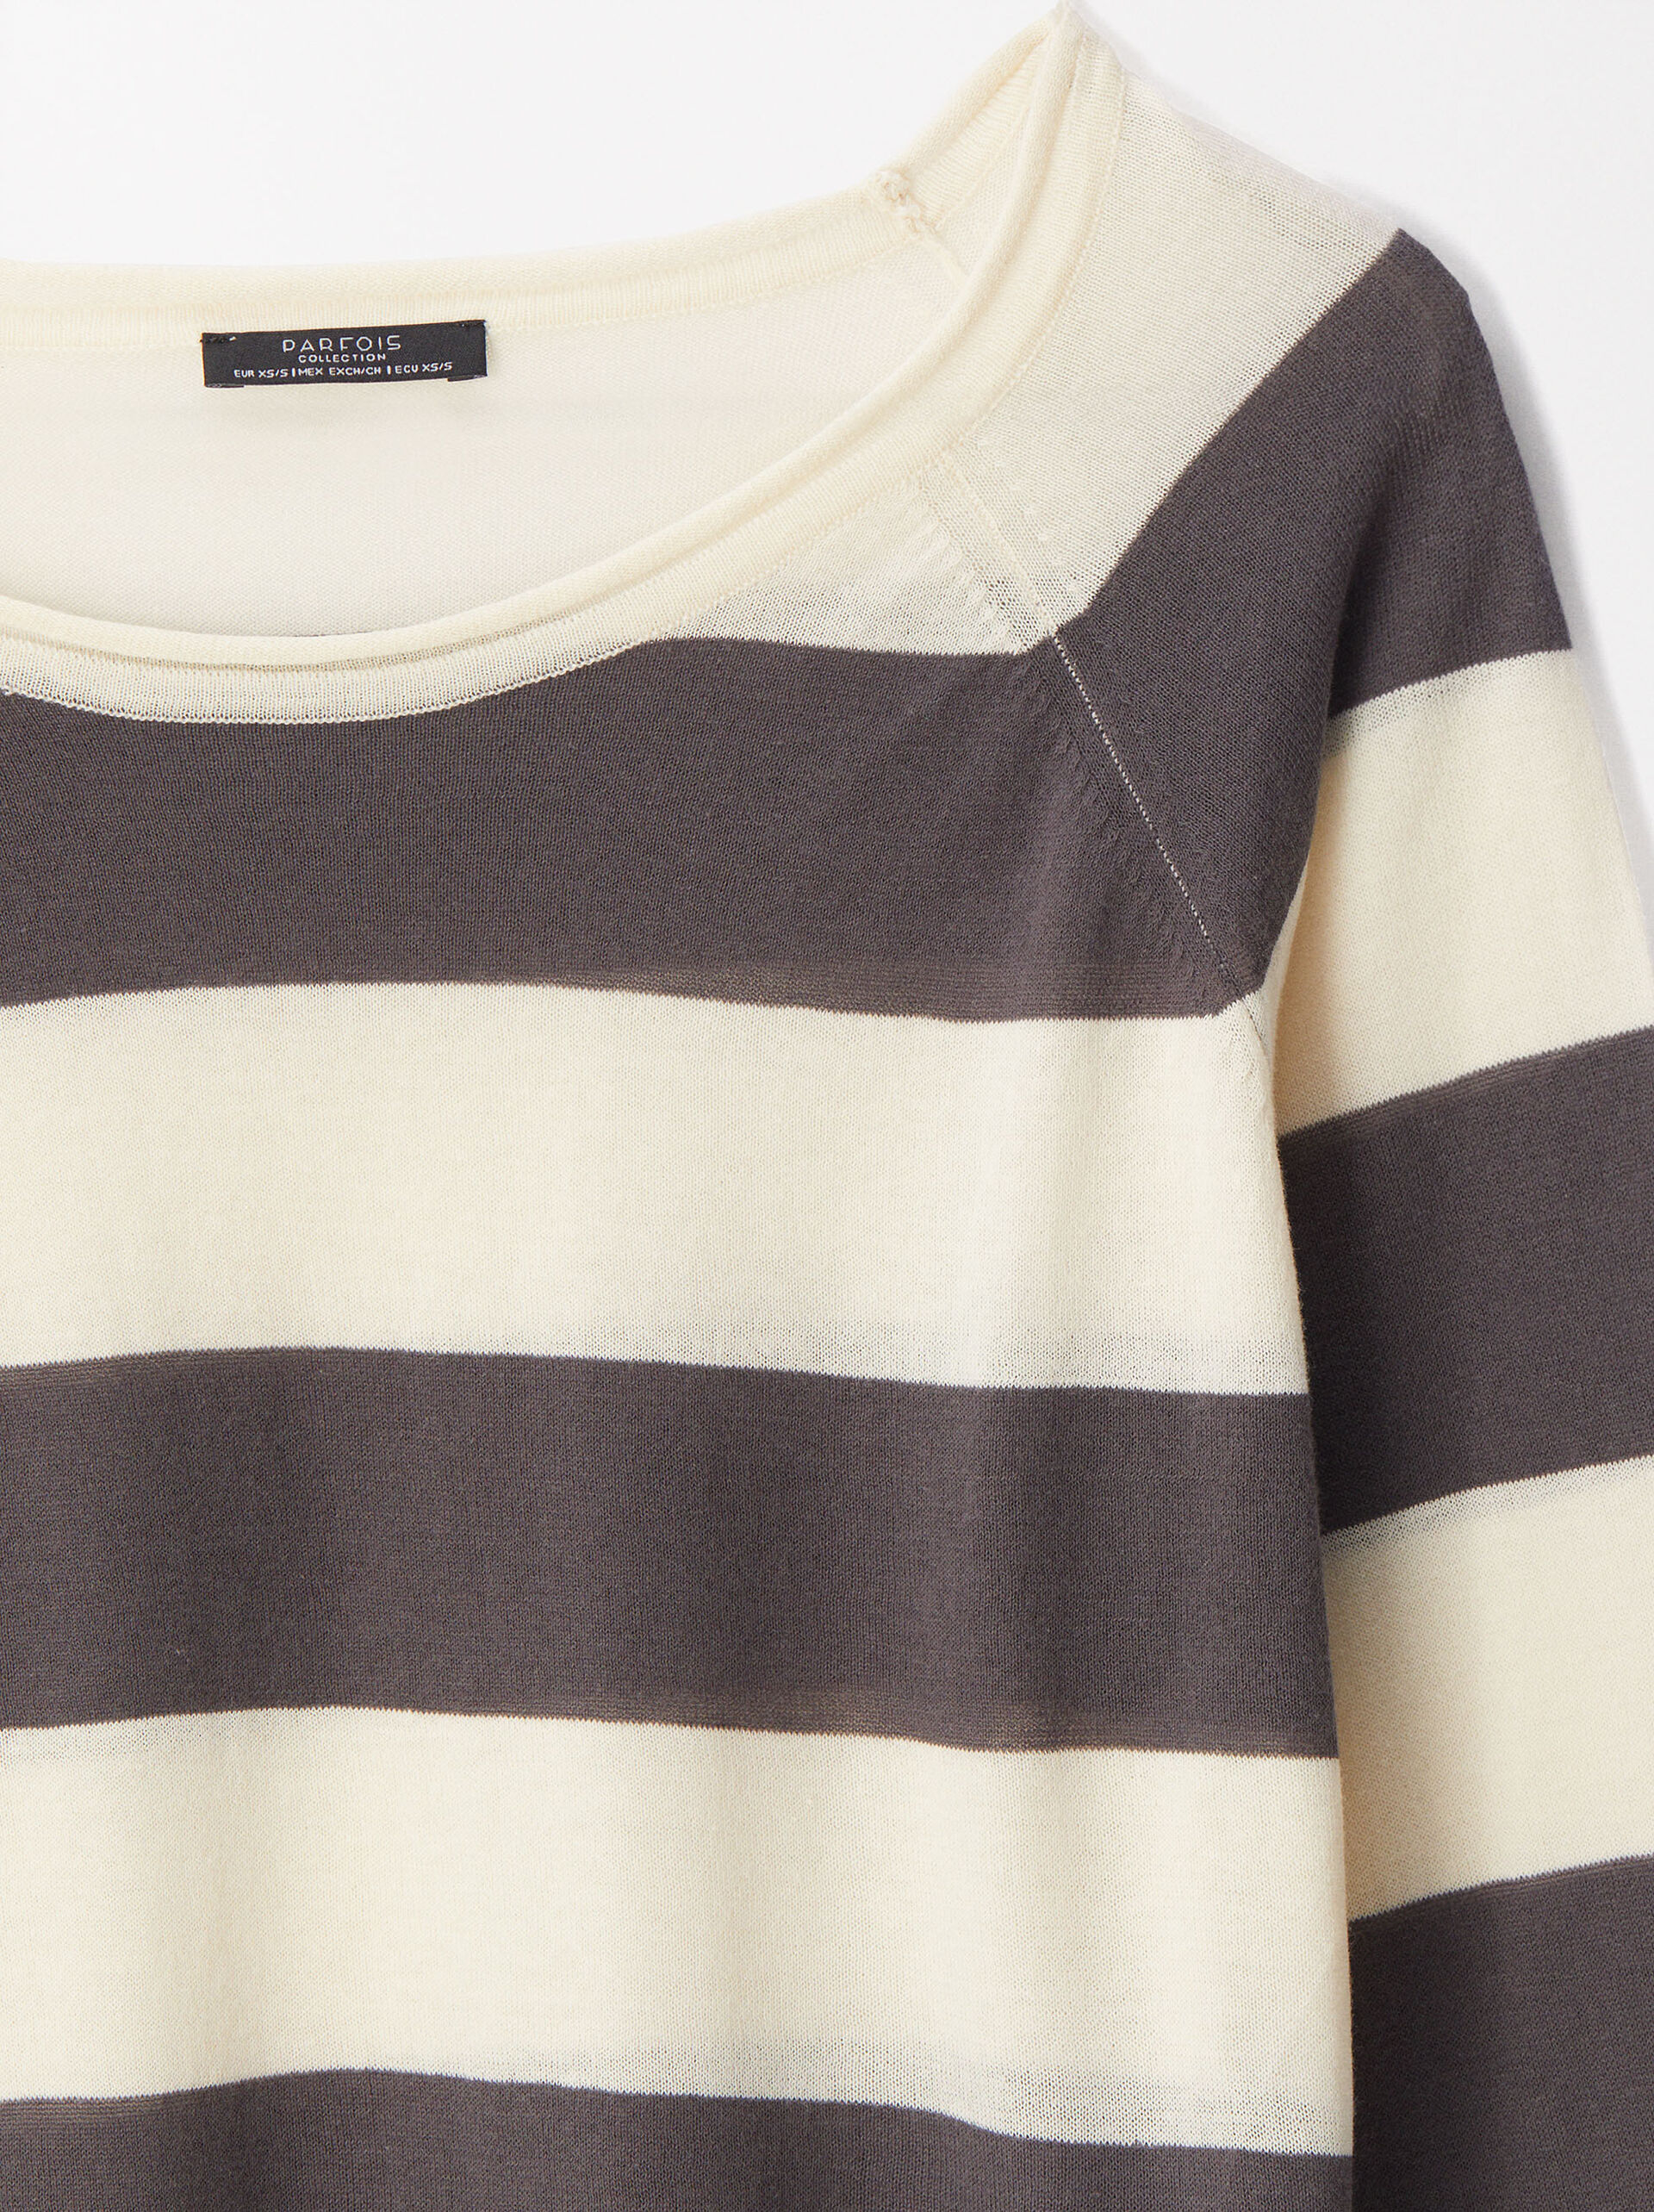 Striped Knit Sweater image number 6.0